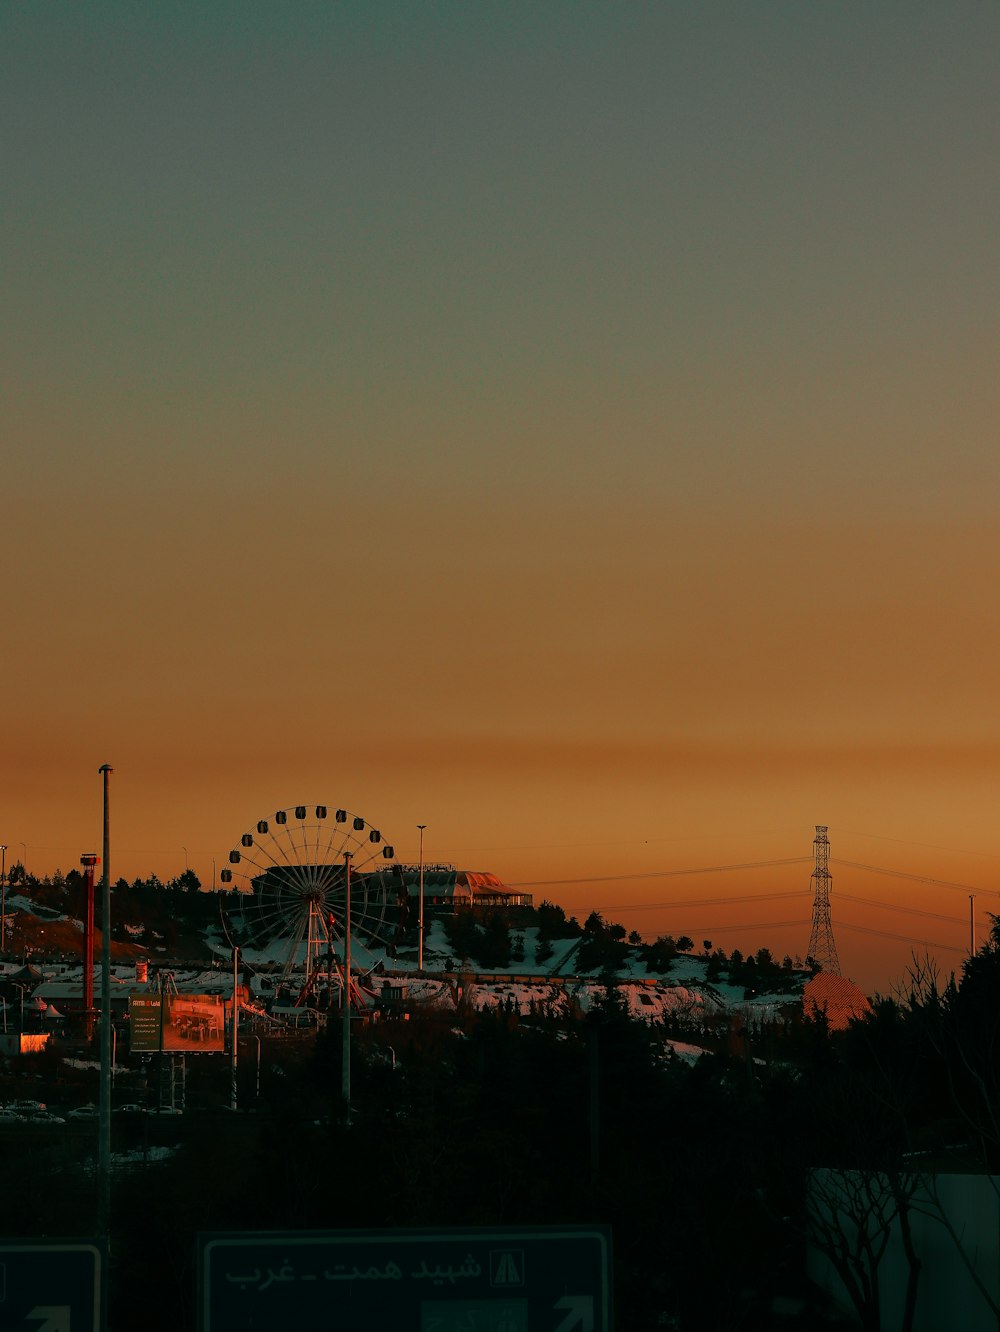 a sunset view of a roller coaster and a ferris wheel